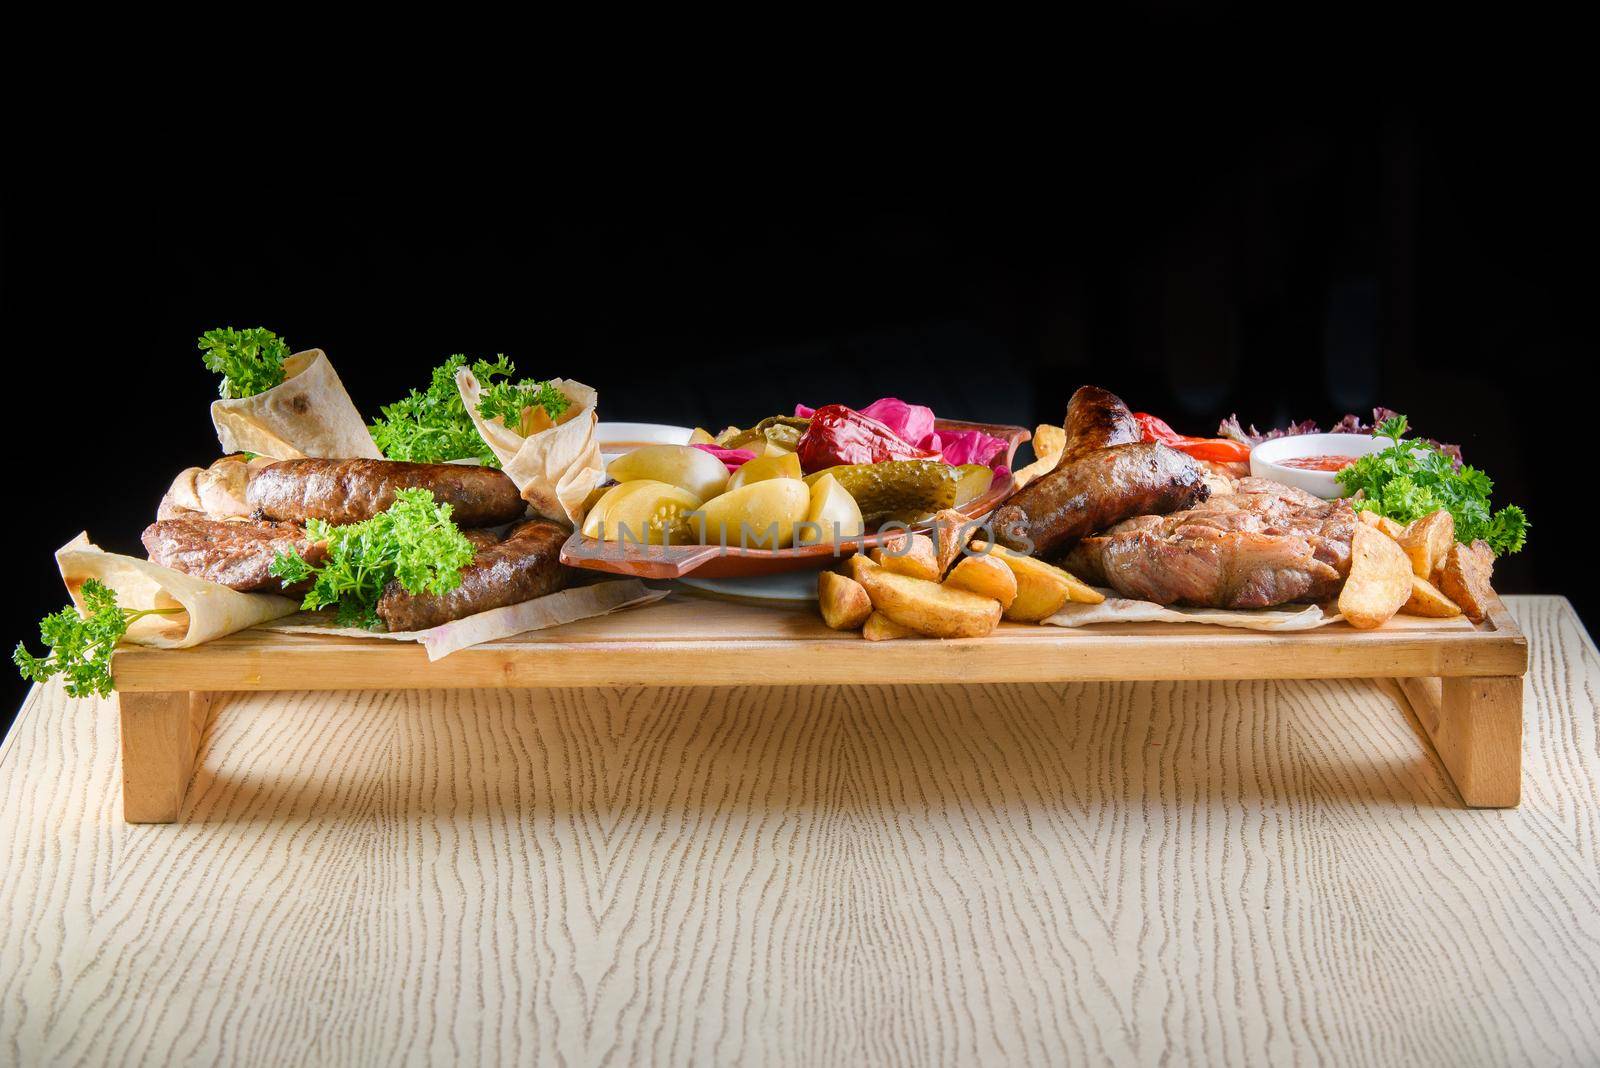 Assortment of fried meat, potatoes, sausages, pickles, tomatoes, peppers, herbs, lavash on a wooden tray on the table by Rabizo